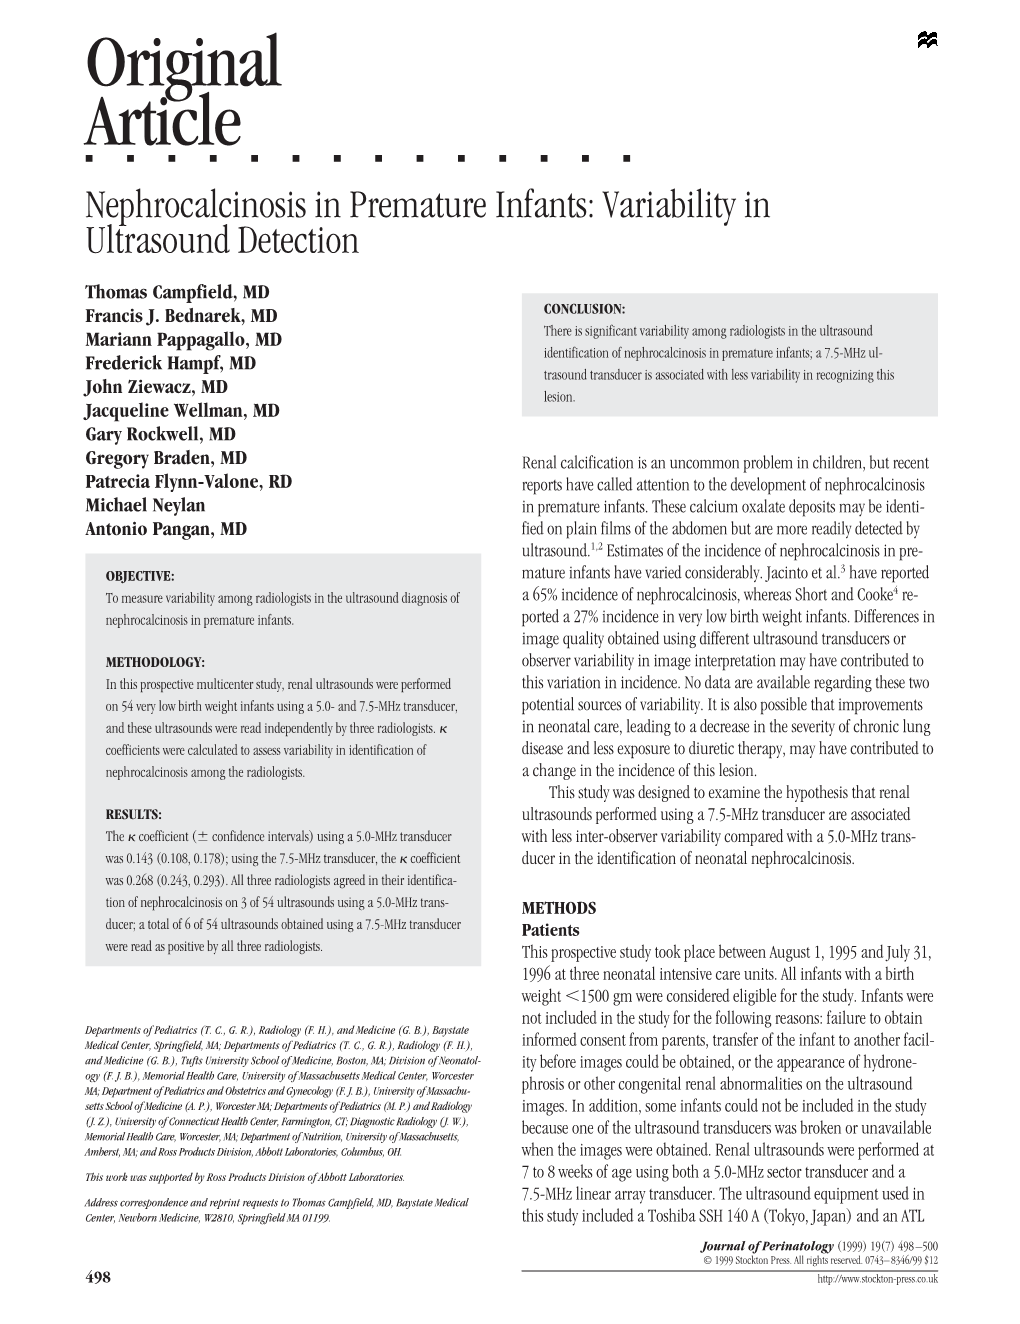 Nephrocalcinosis in Premature Infants: Variability in Ultrasound Detection